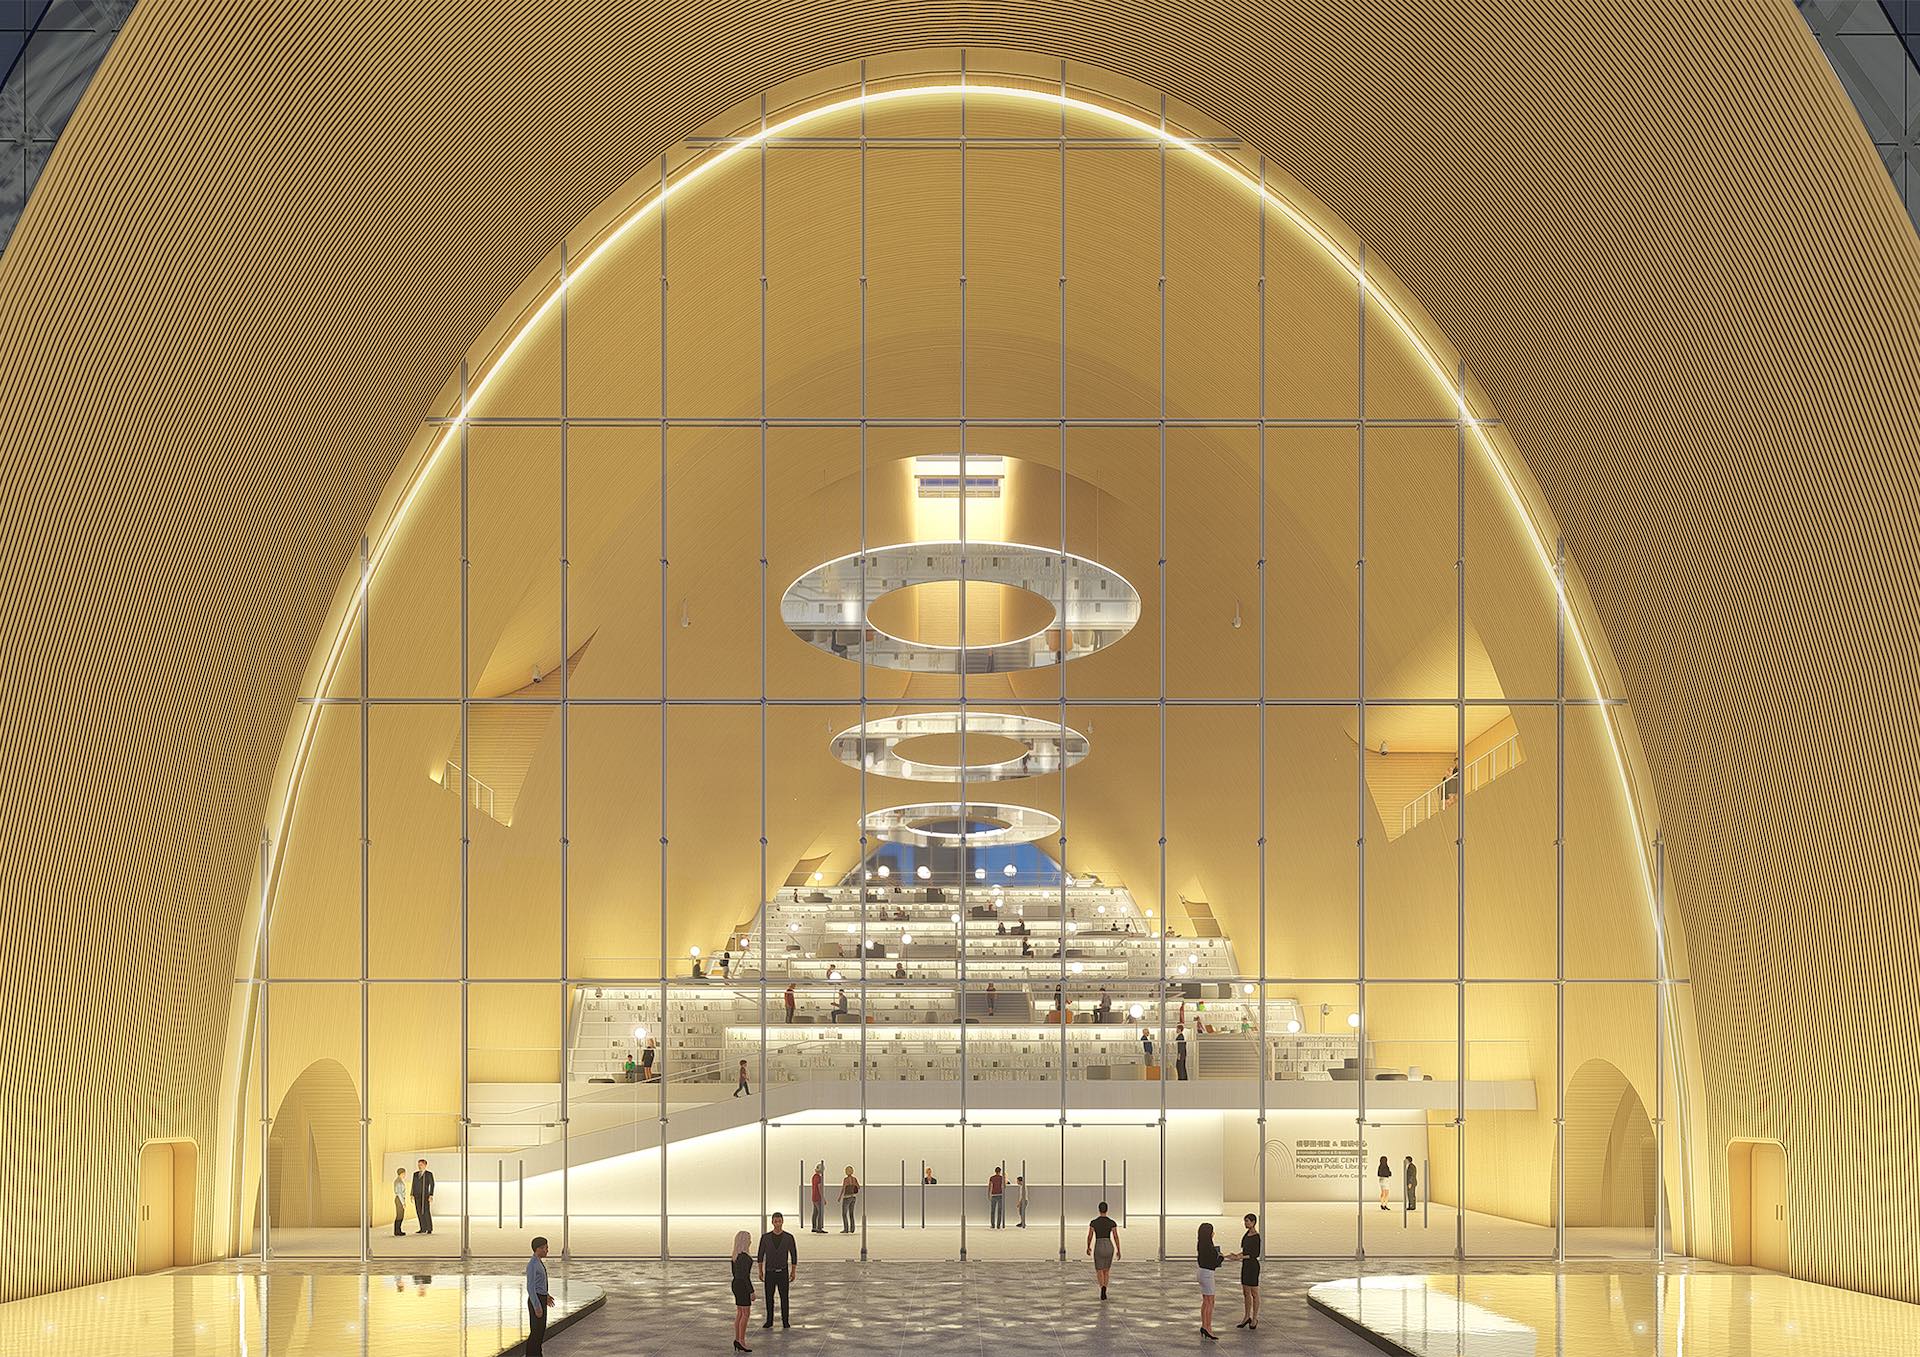 MUSE Design Winners - Culture & Art Complex with Vaulted Halls